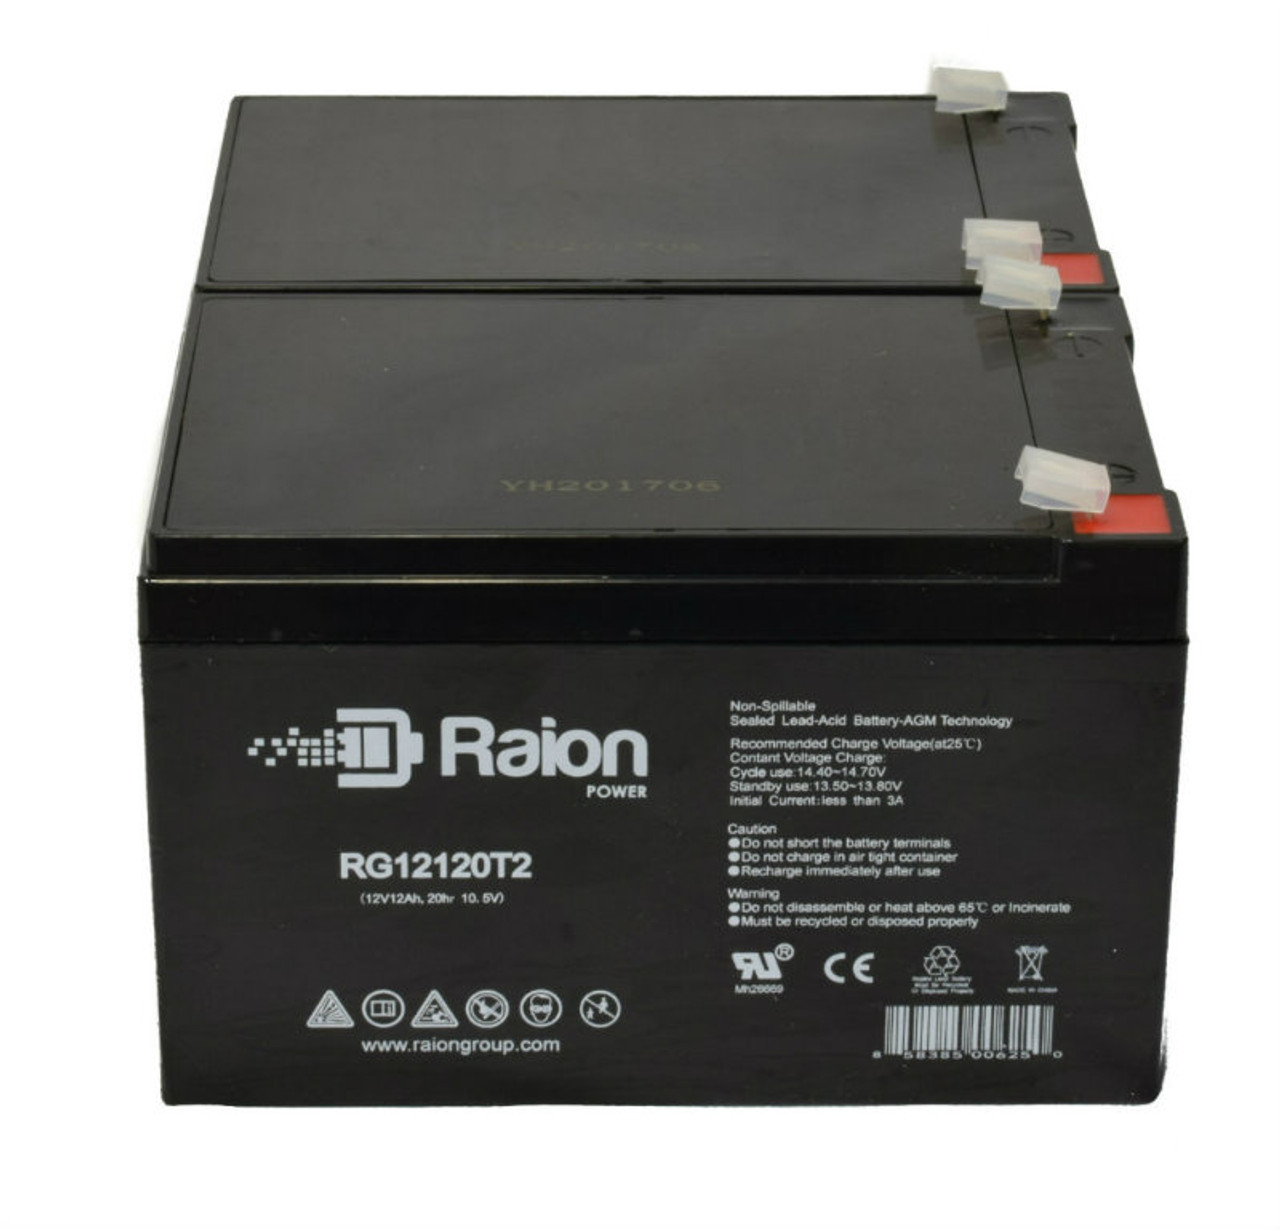 Raion Power 12V 12Ah Non-Spillable Compatible Replacement Battery for SES BT14-12 - (2 Pack)